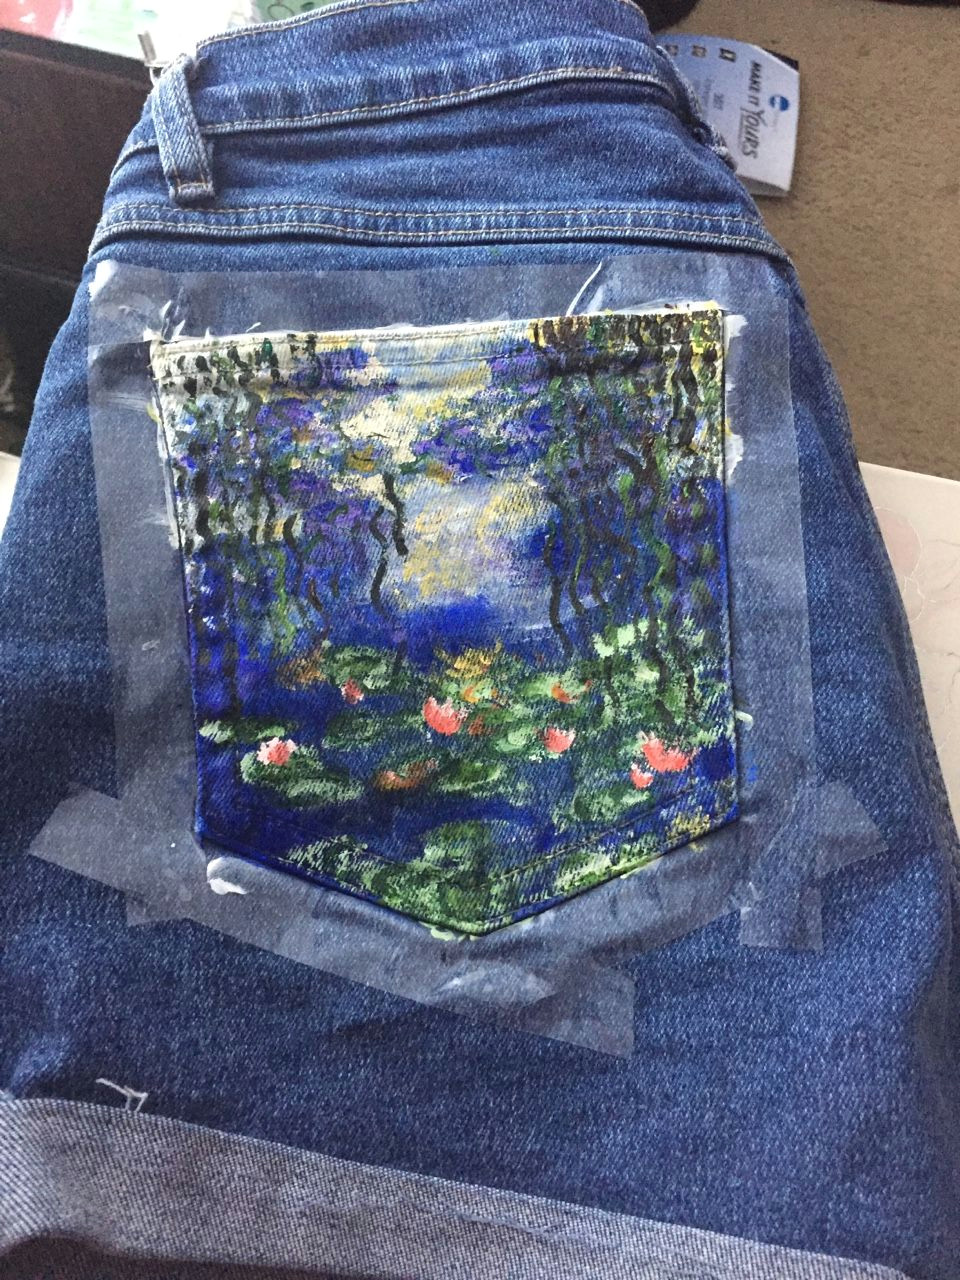 How to Draw Ripped Jeans Easy Paint Pant Pockets with Your Favorite Mural Diy Fashion